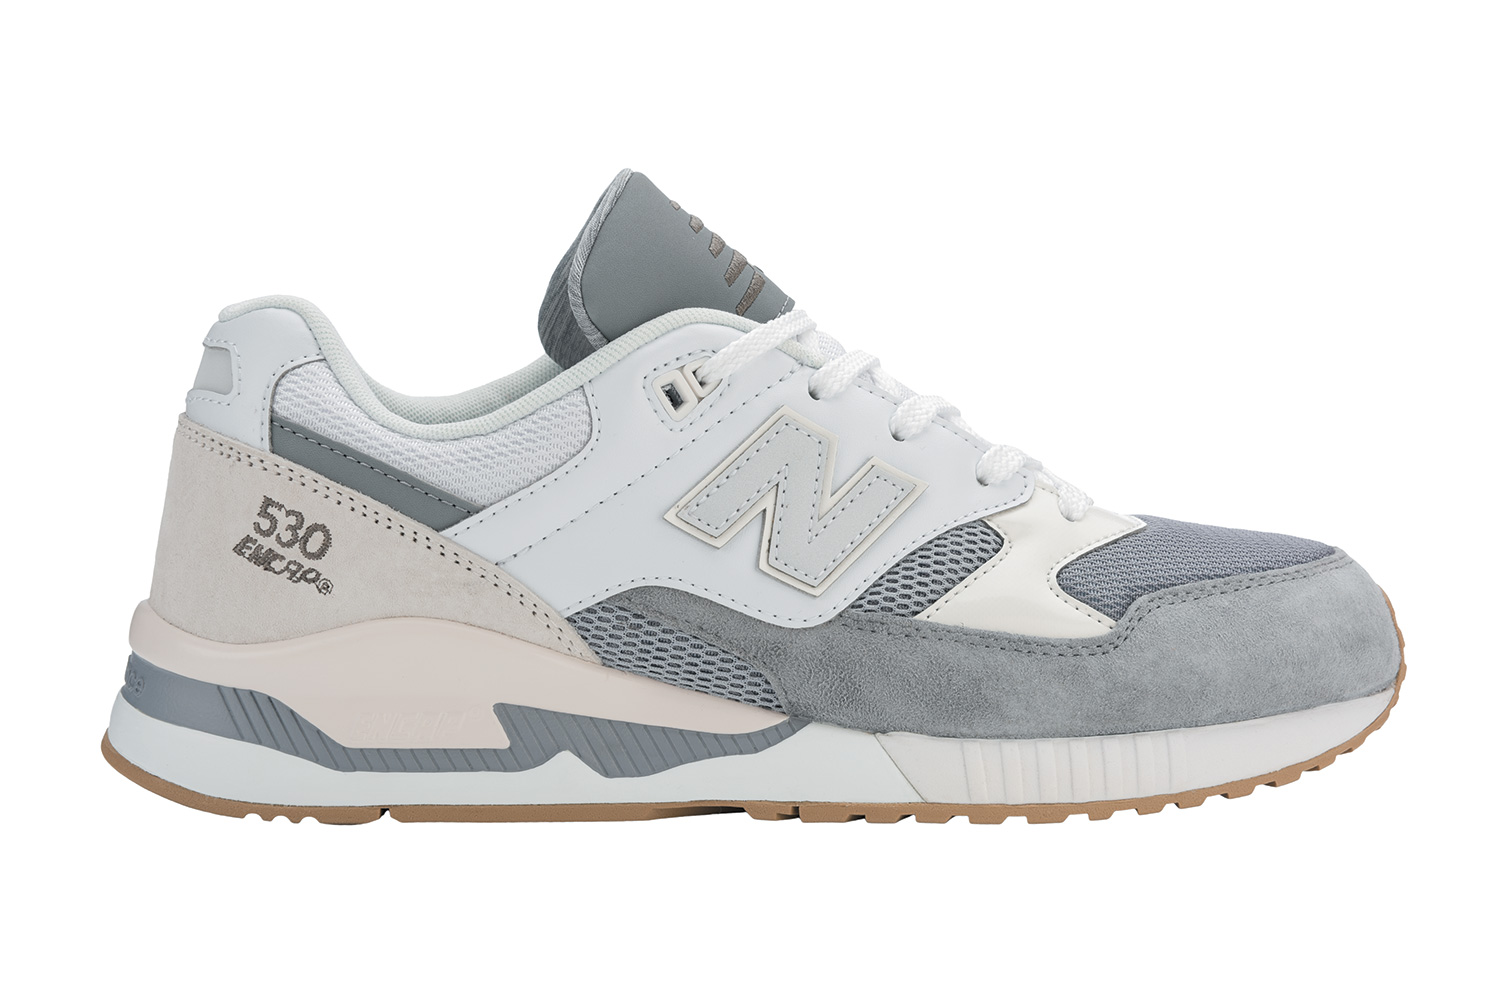 New Balance 530 90s Athletic Pack